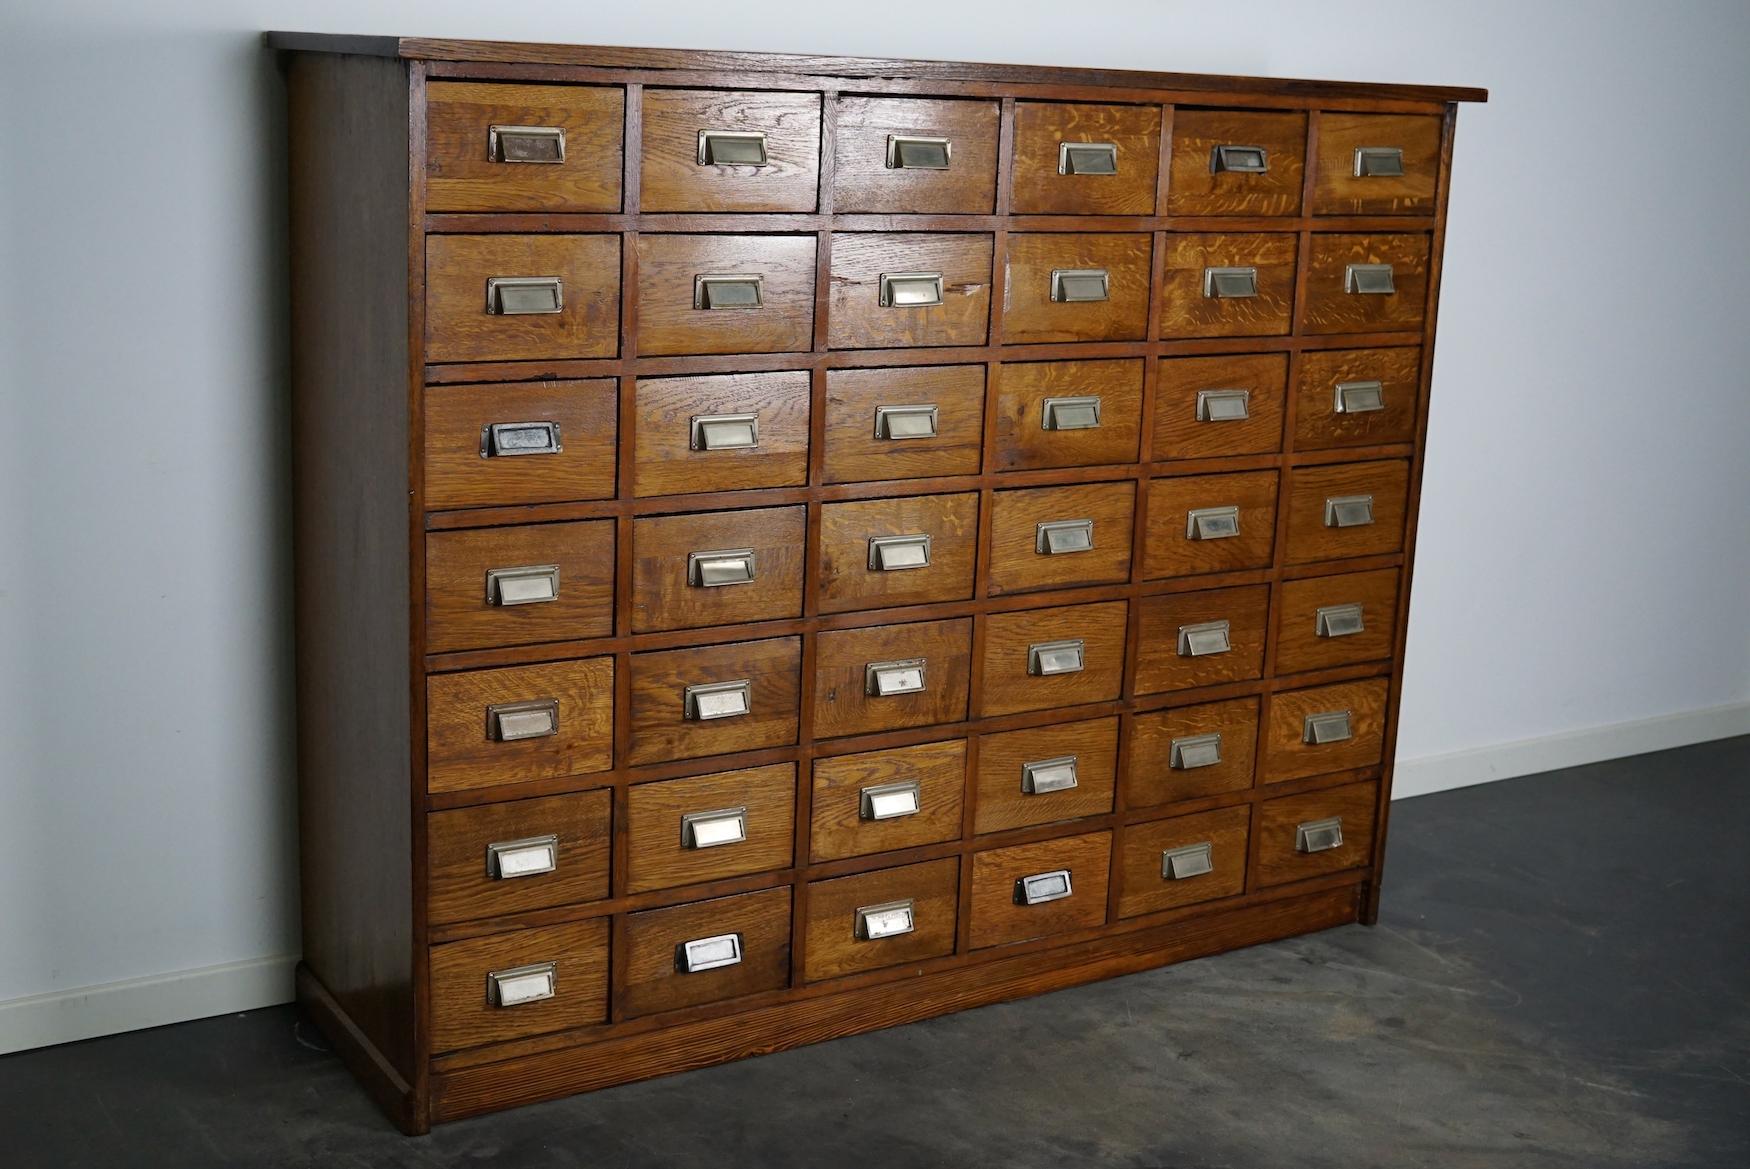 This apothecary cabinet was made circa 1950s in Germany. It features 42 decent sized drawers with metal handles. The interior dimensions of the drawers are: D W H 38 x 21 x 13 cm.